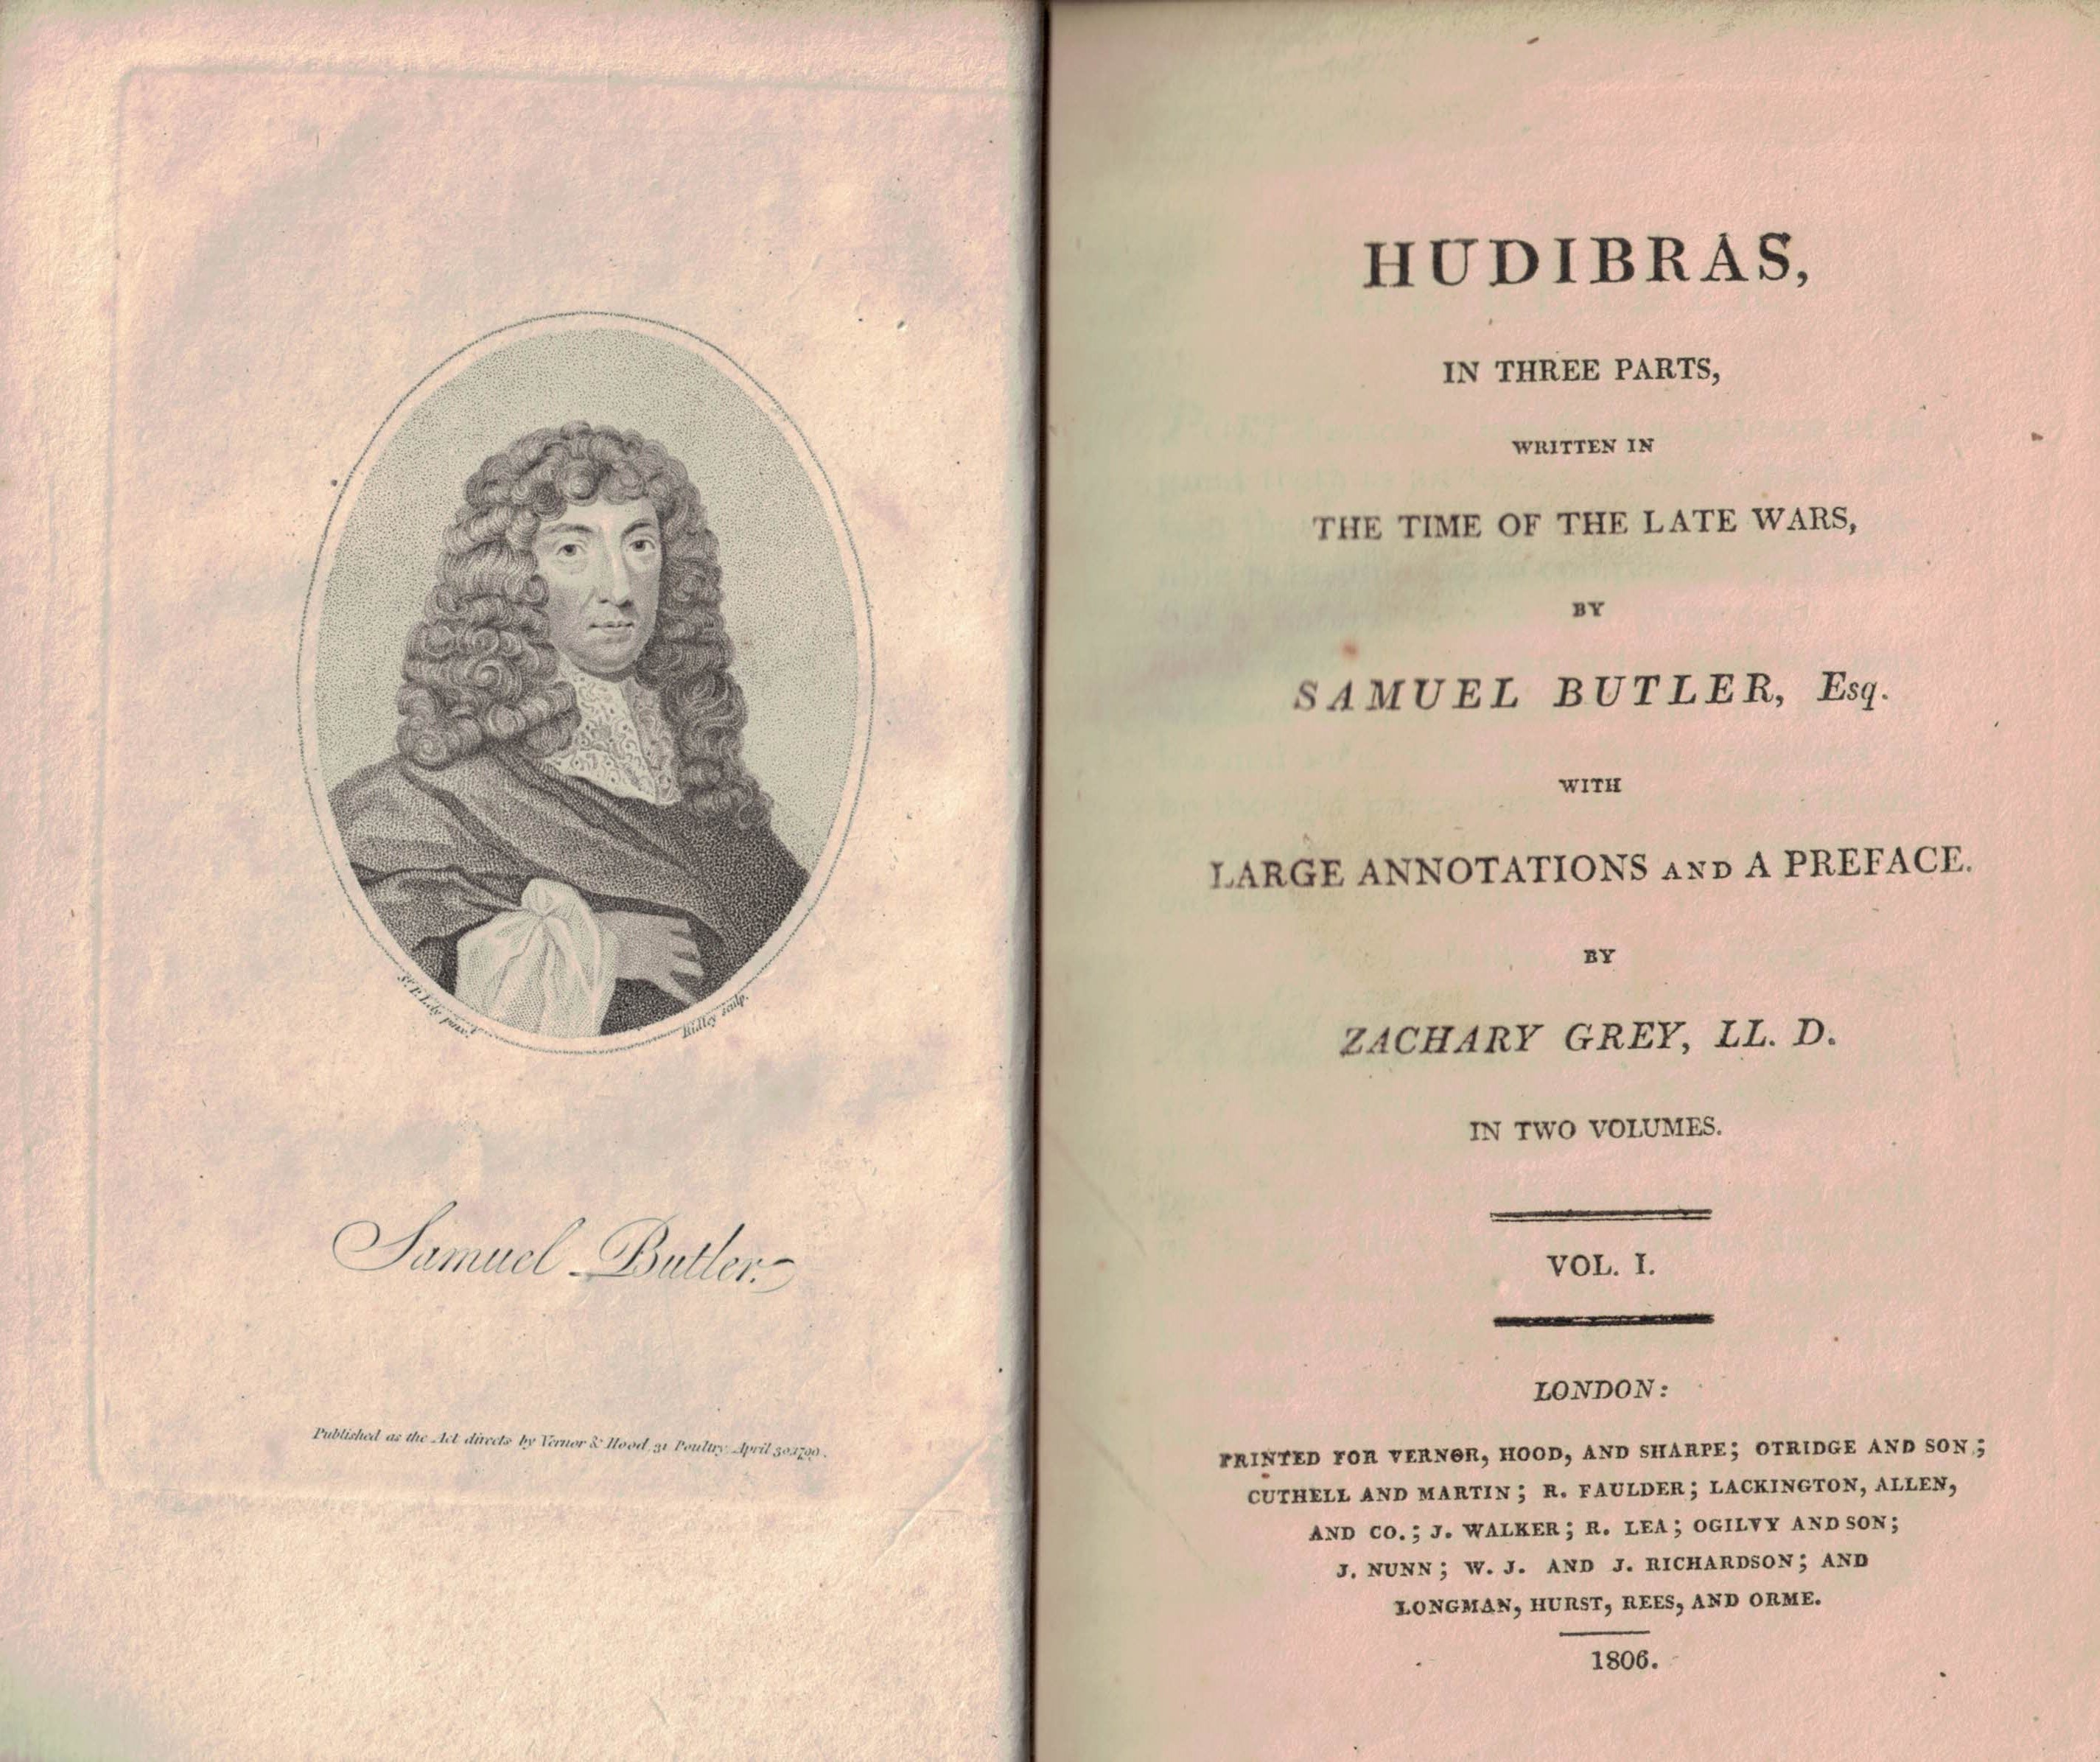 Hudibras, in Three Parts, Written in the Time of The Late Wars. With Large Annotations and a Preface by Zachary Grey. Volume 1 only. 1806.